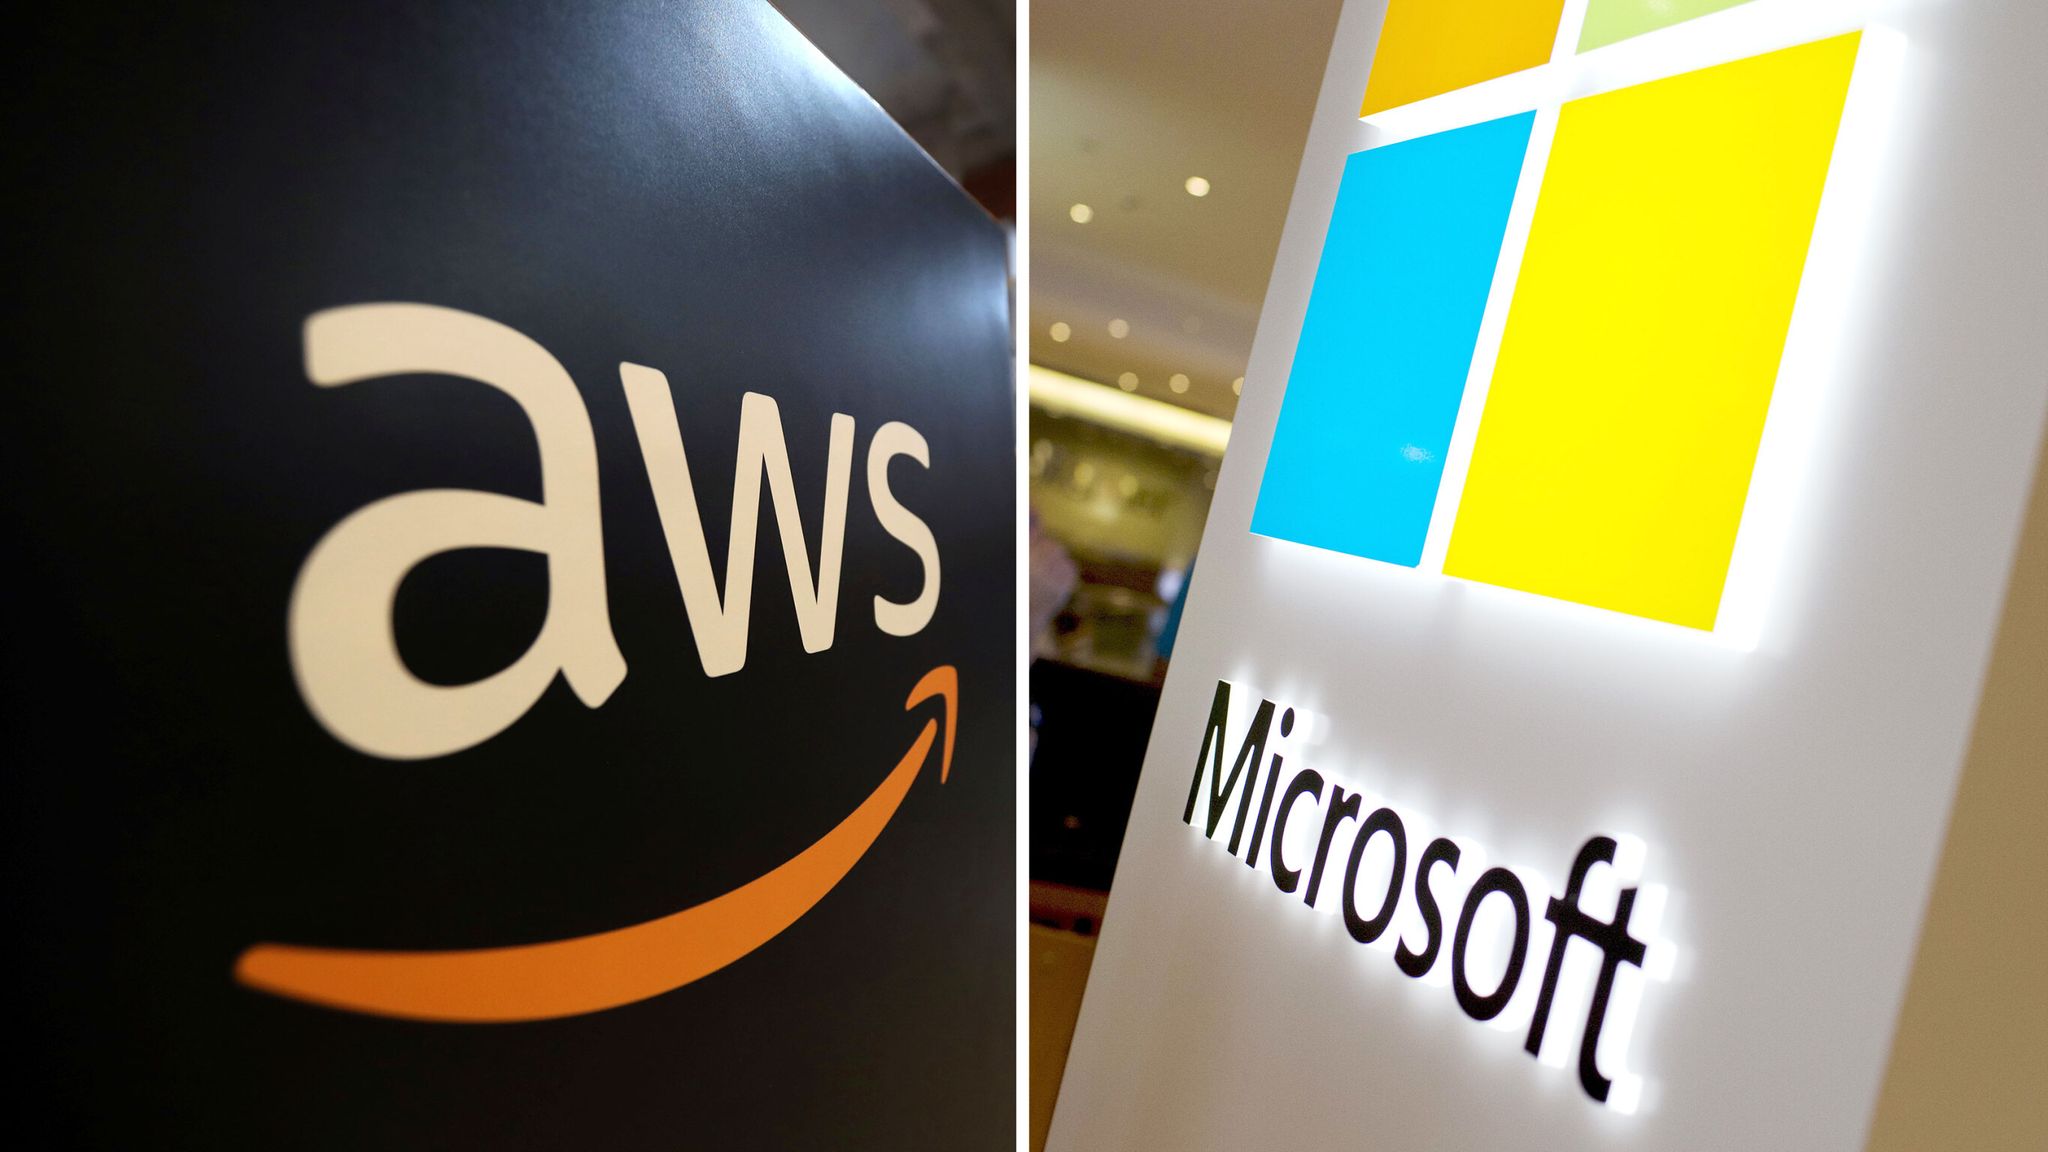 Microsoft plans to invest $4 billion in France, while Amazon will invest $1.3 billion